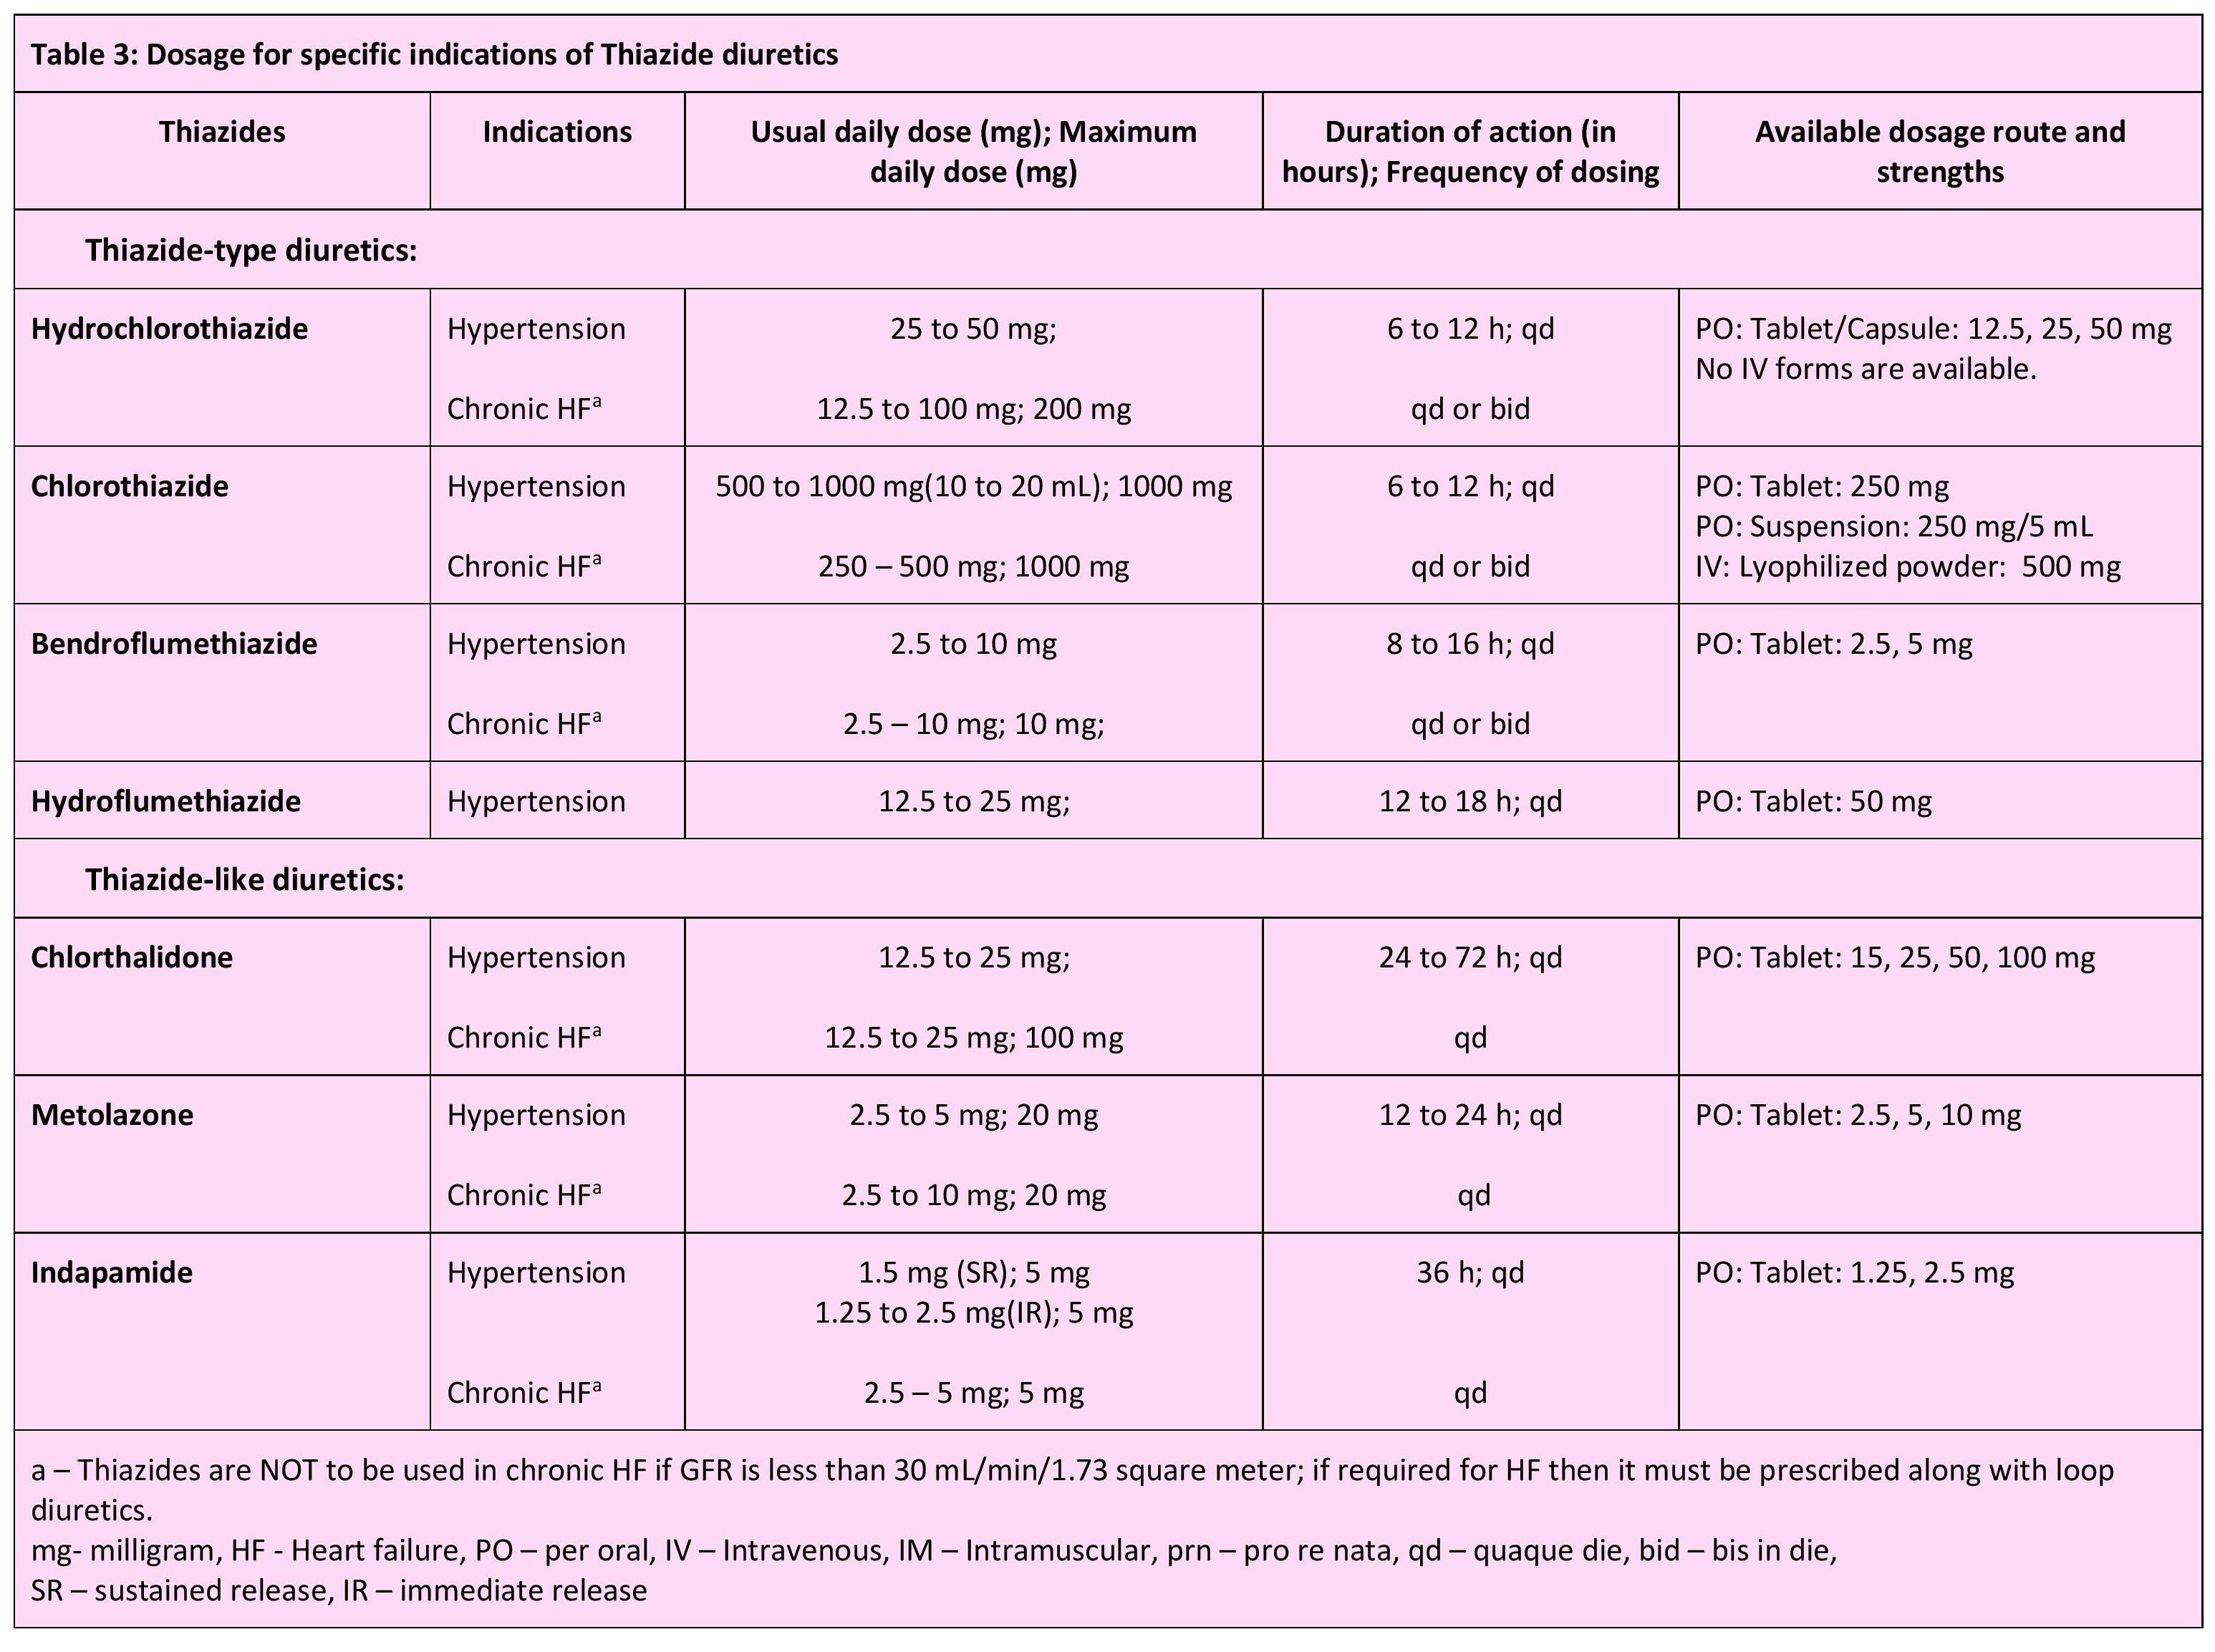 Table 3: Dosages for specific indications of thiazide diuretics